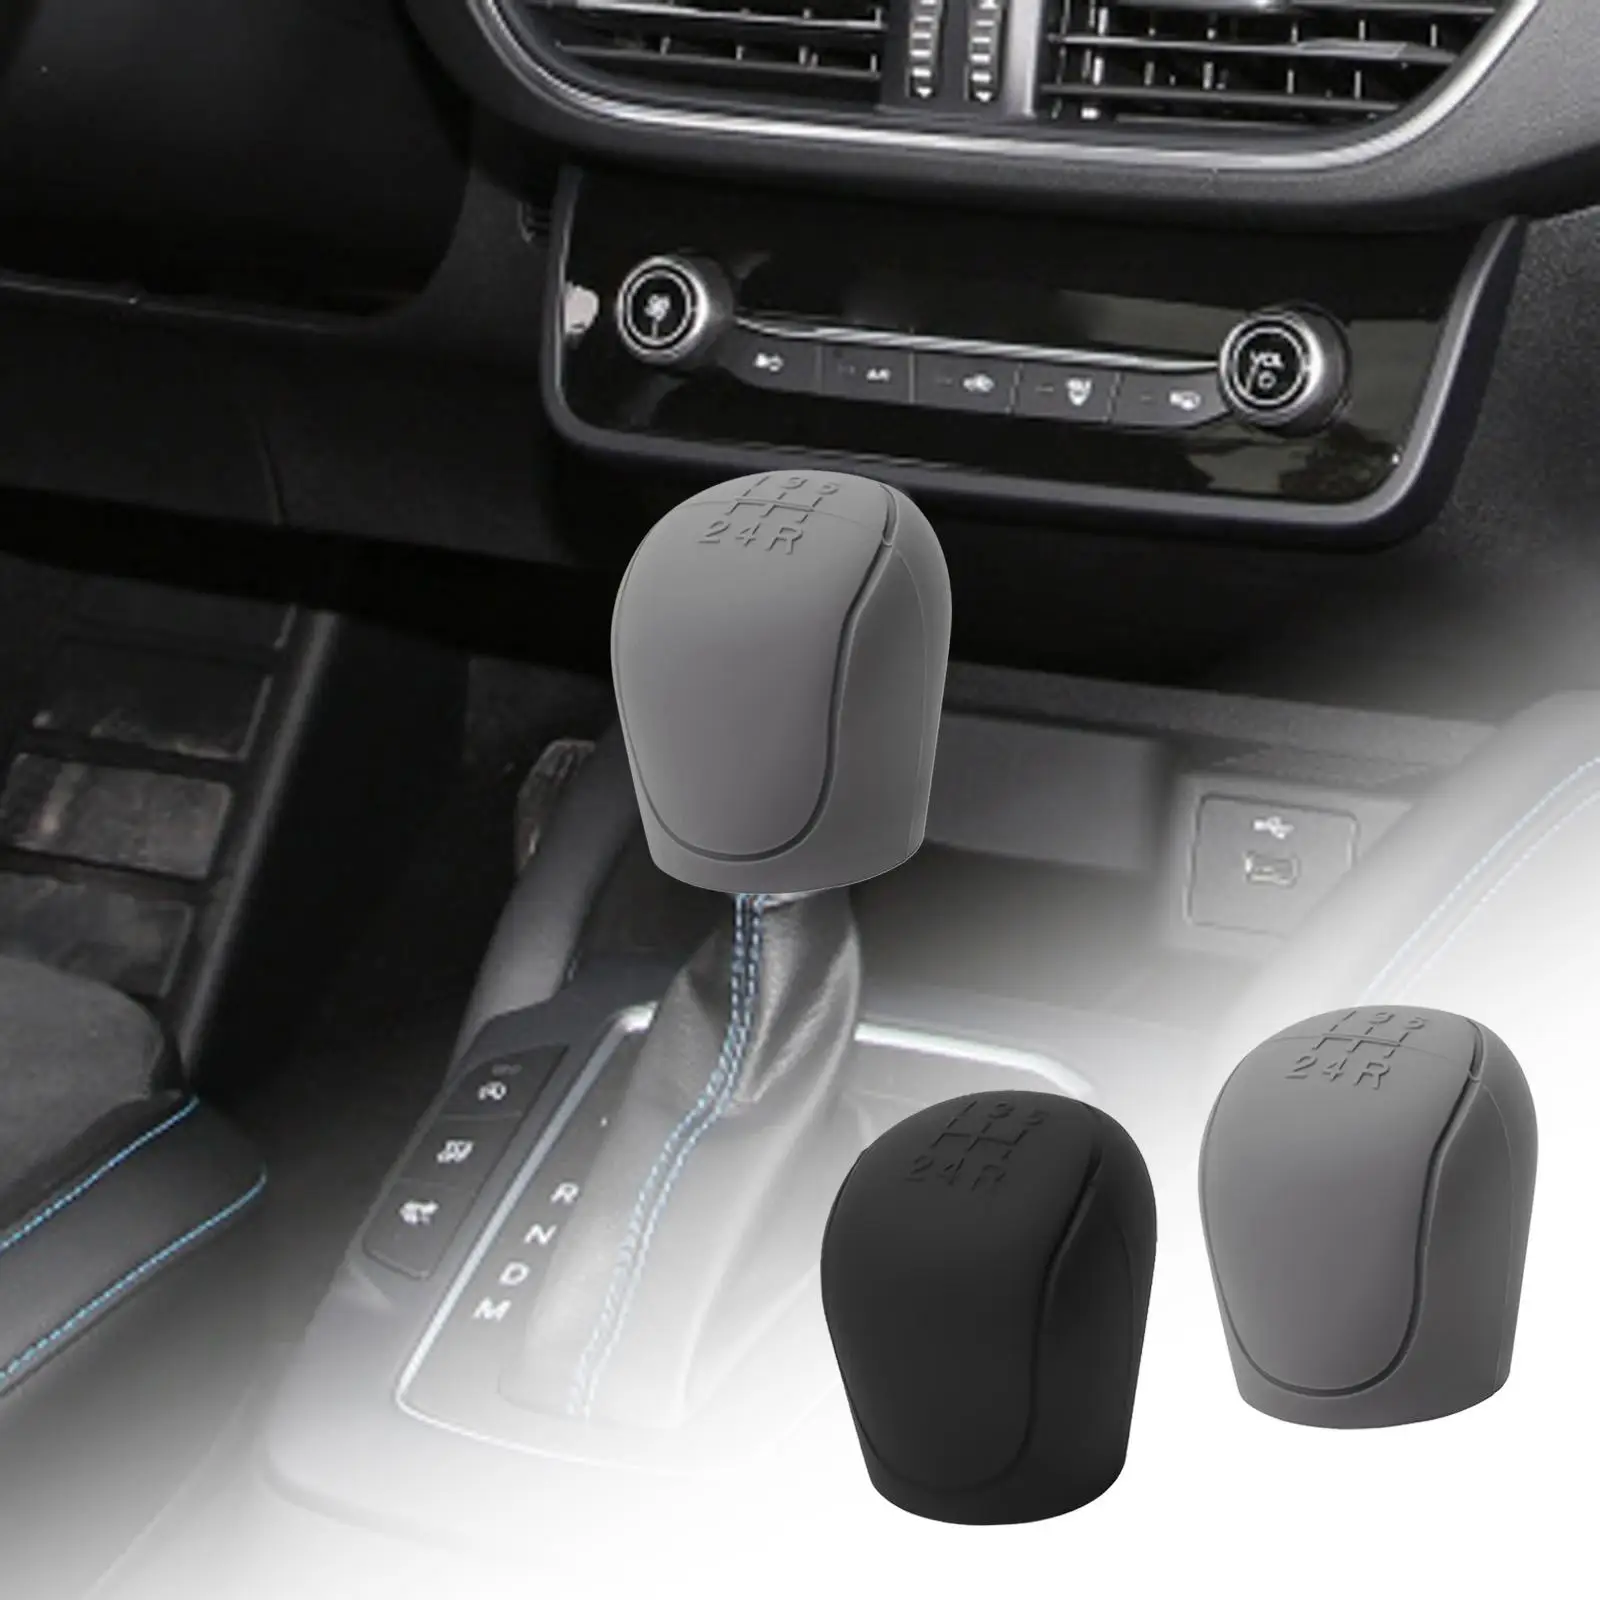 Gear Knob Cover Anti-Slip Car Accessories Protector Direct Replaceser Sleeve Soft Professional Durable for Vehicle